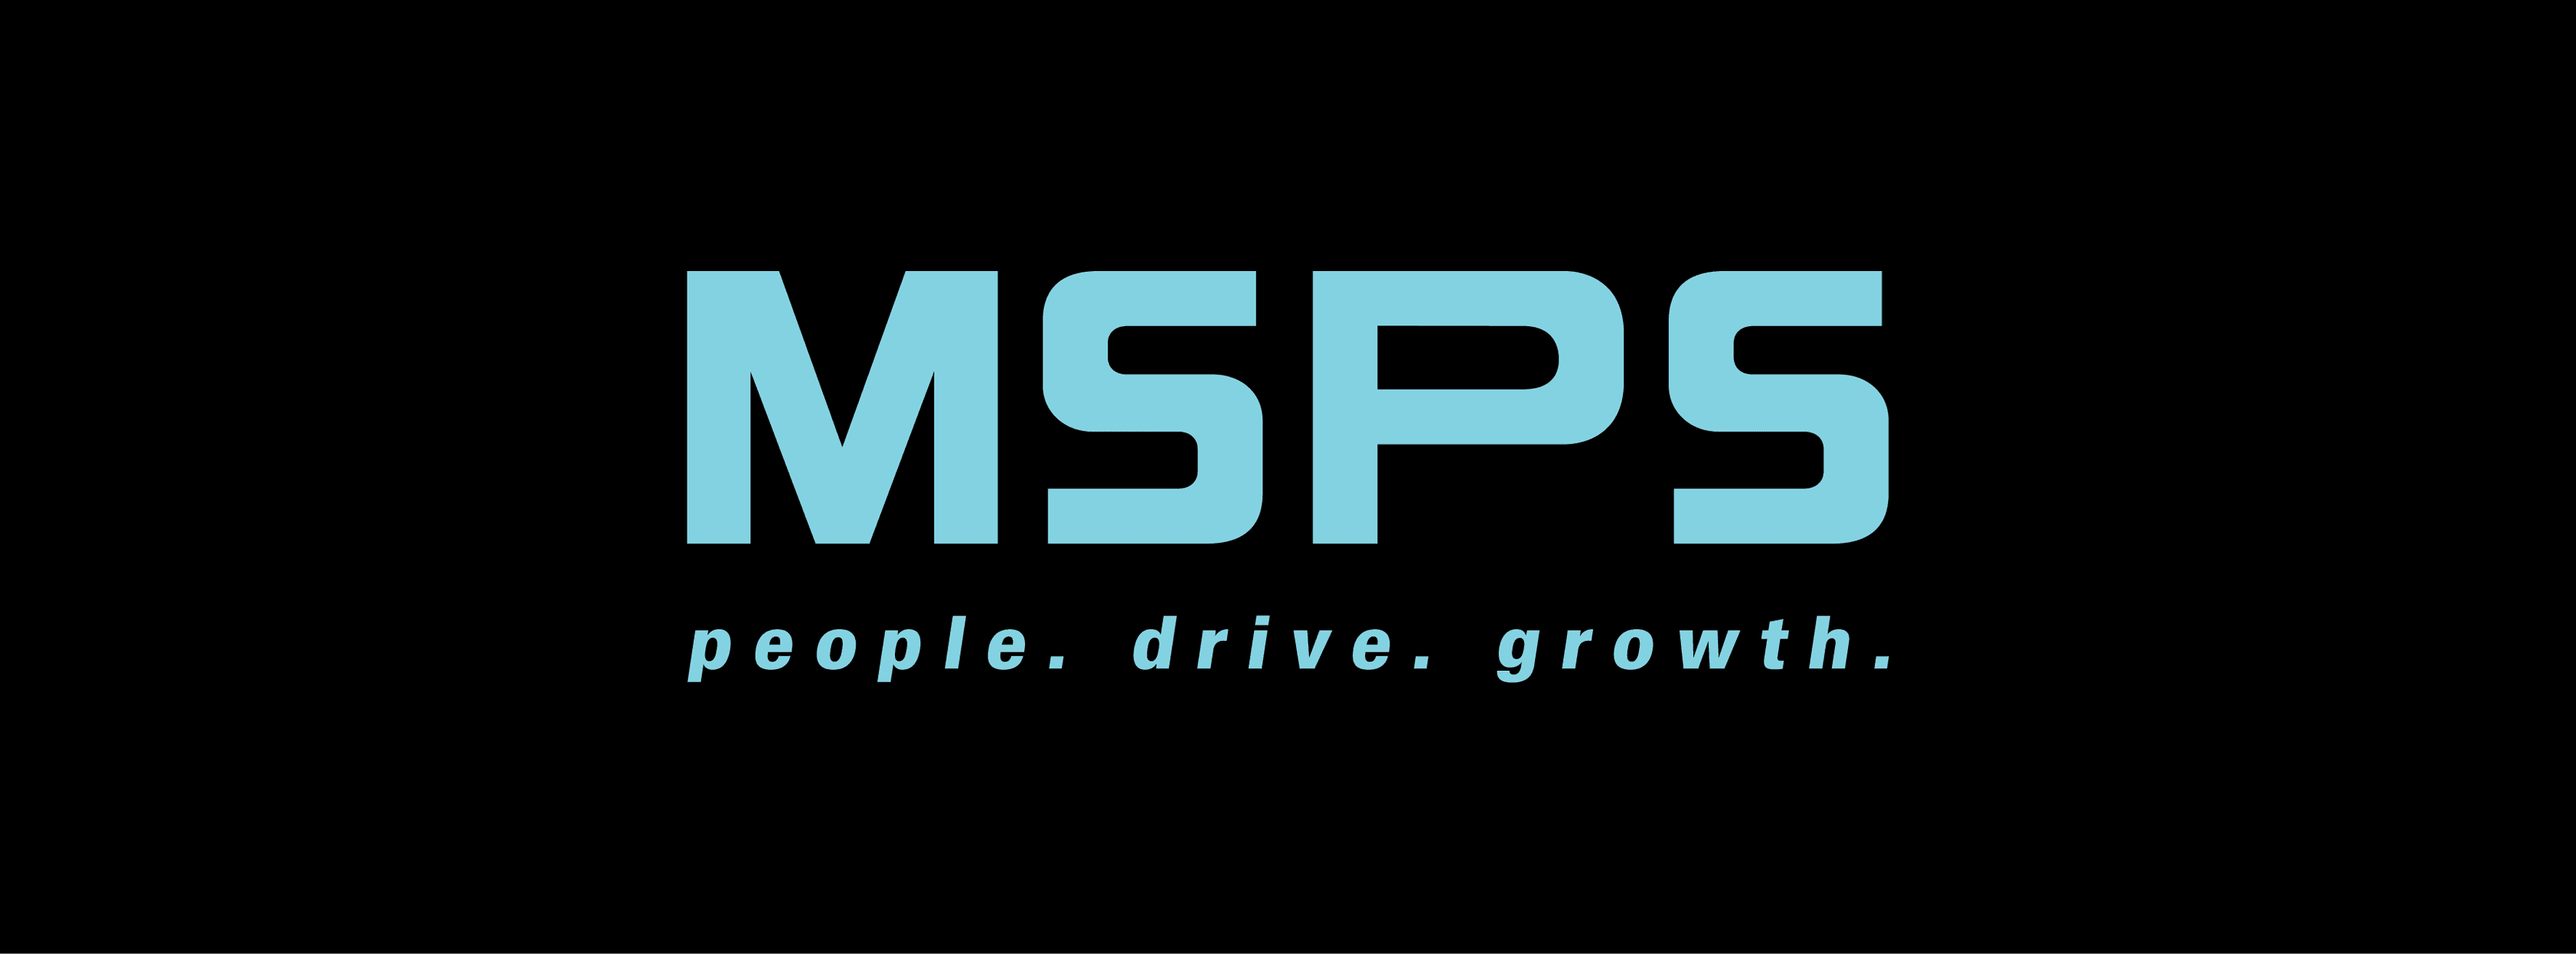 MSPS ΑΕ header cover image